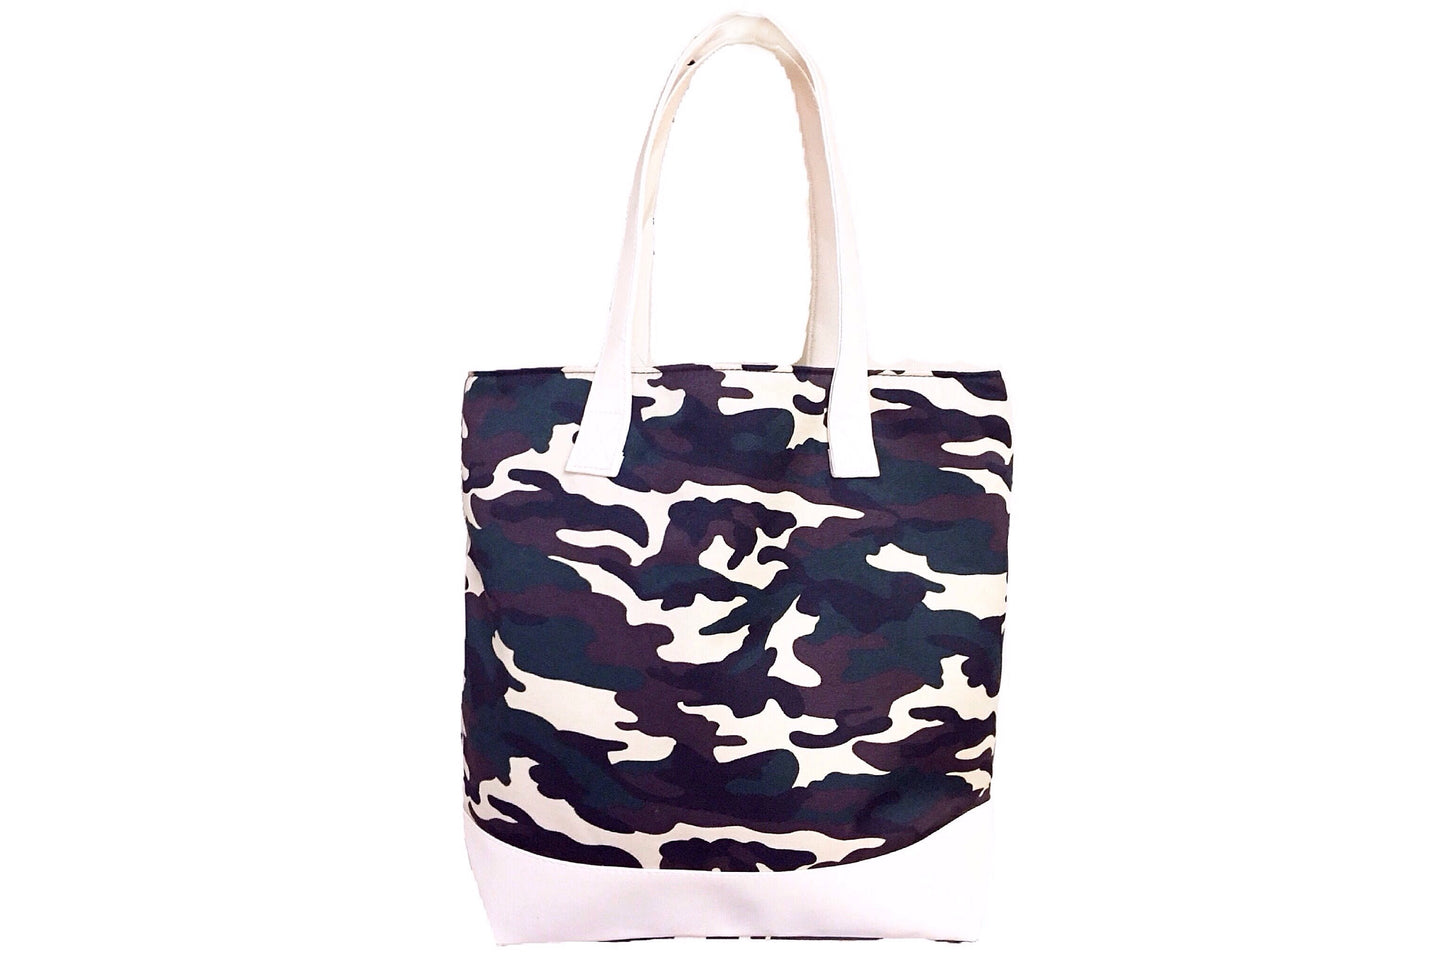 Fabric Casual Swing Tote Bag - Army